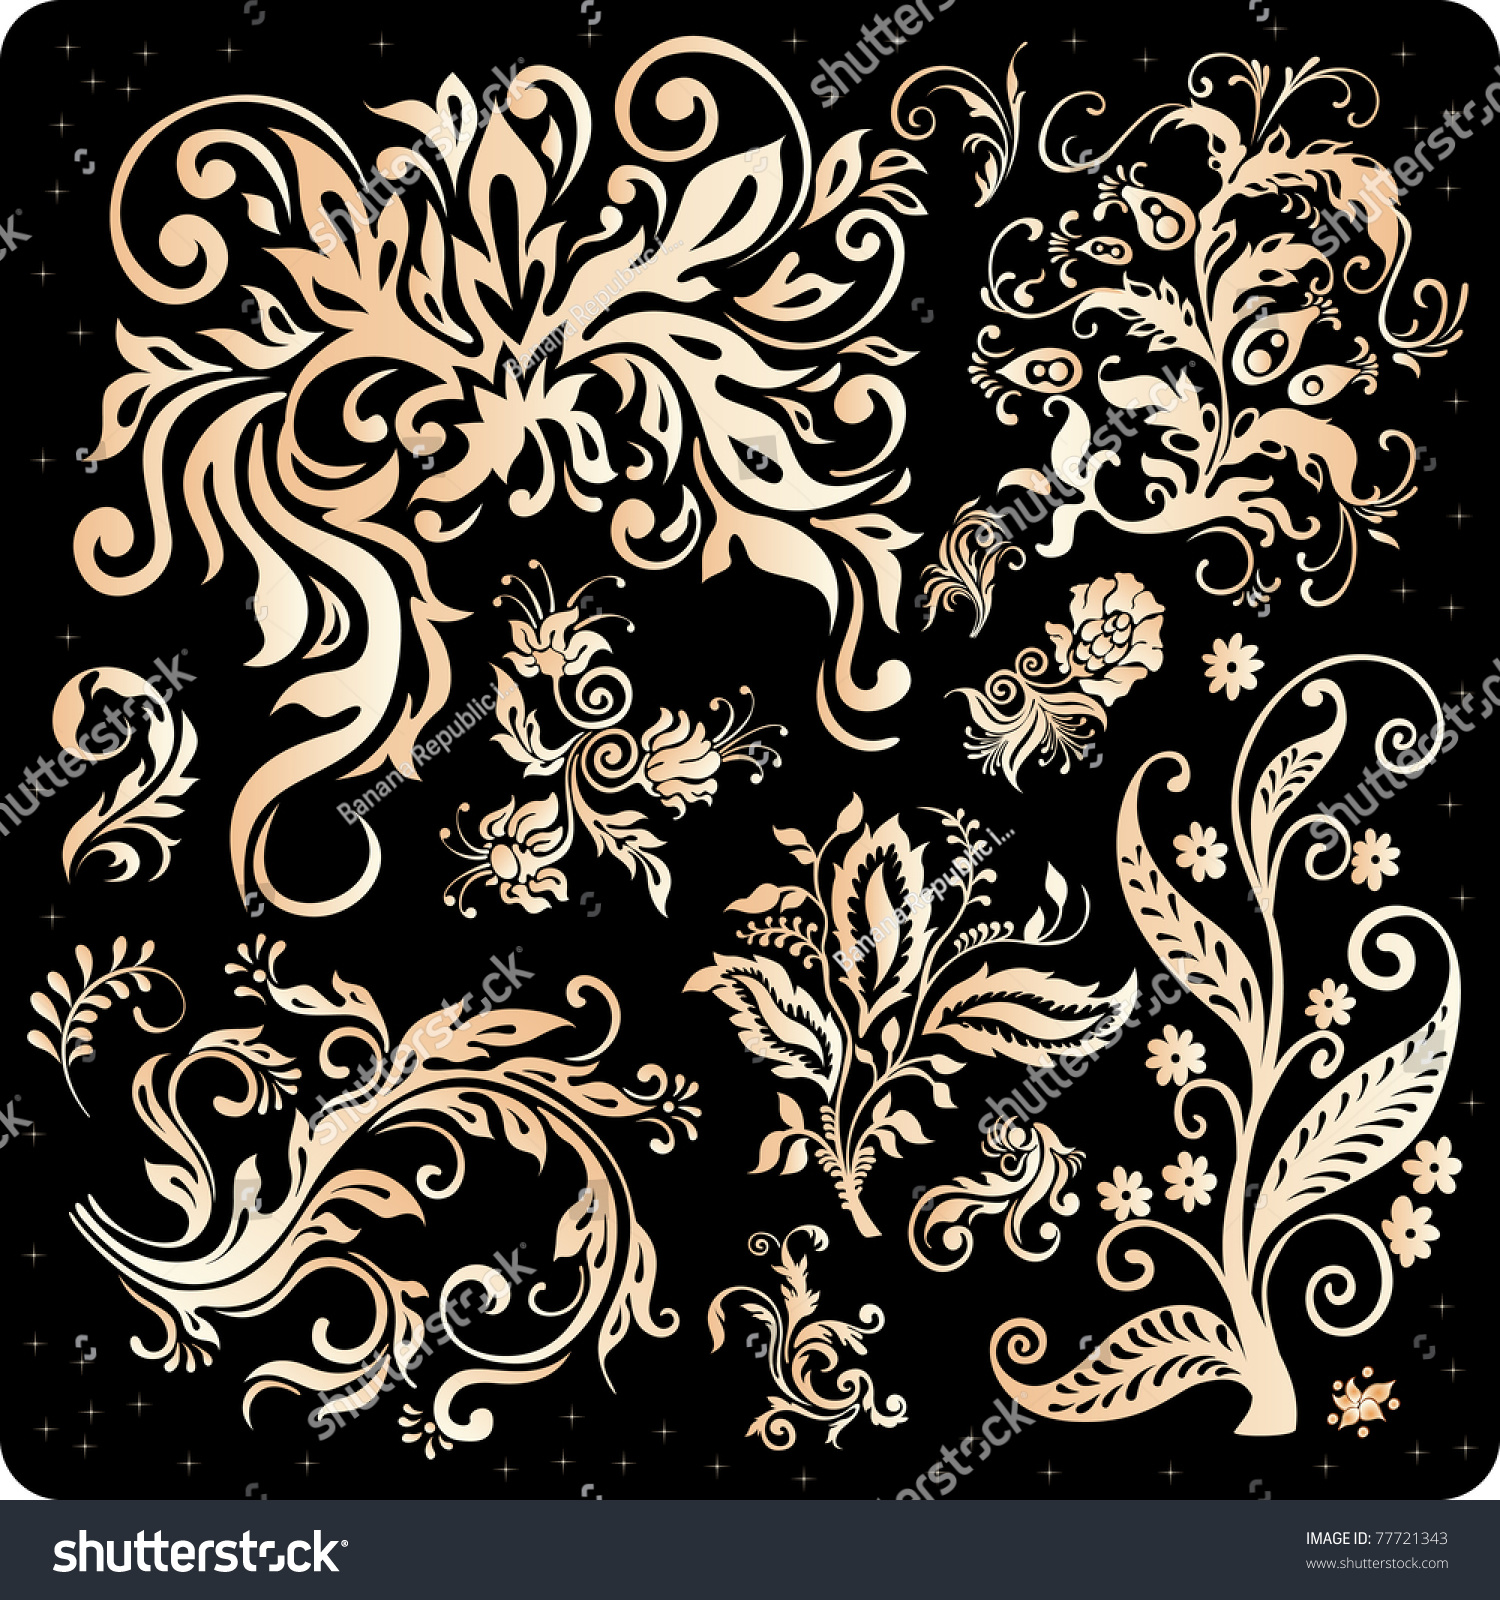 golden floral elements isolated on black #77721343